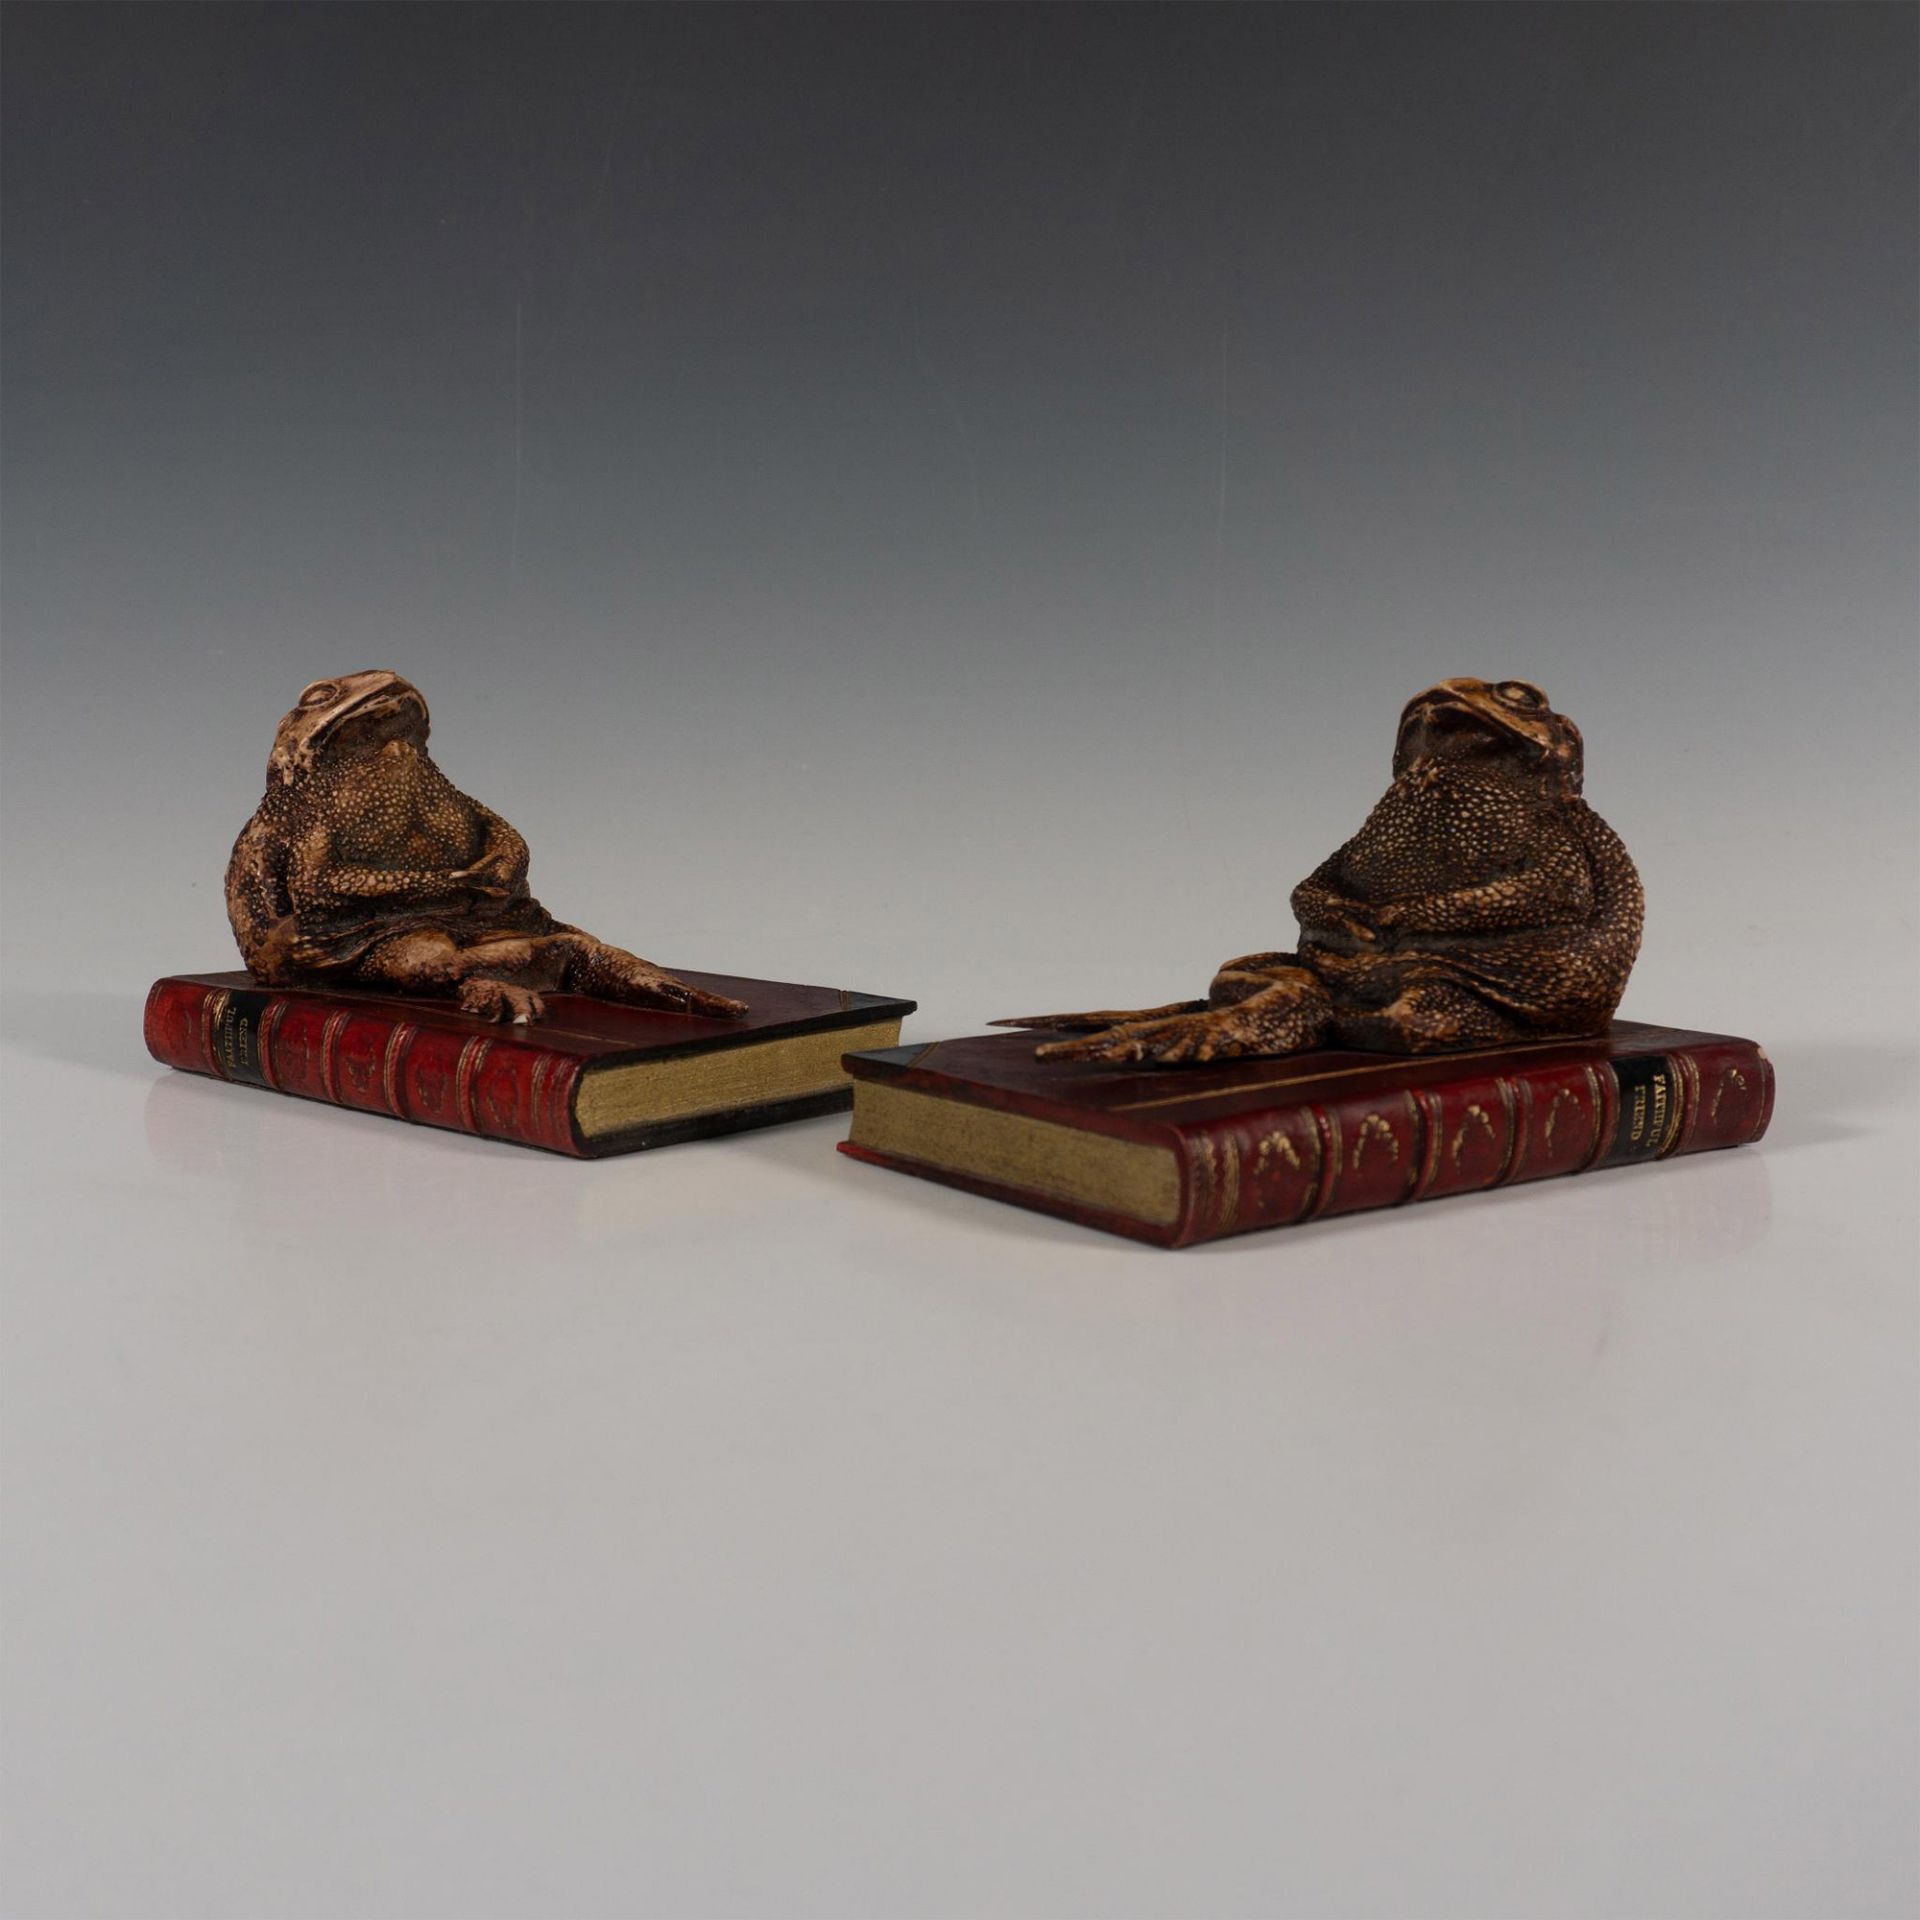 Pair of Original English Handmade Toad Bookends, London - Image 2 of 4